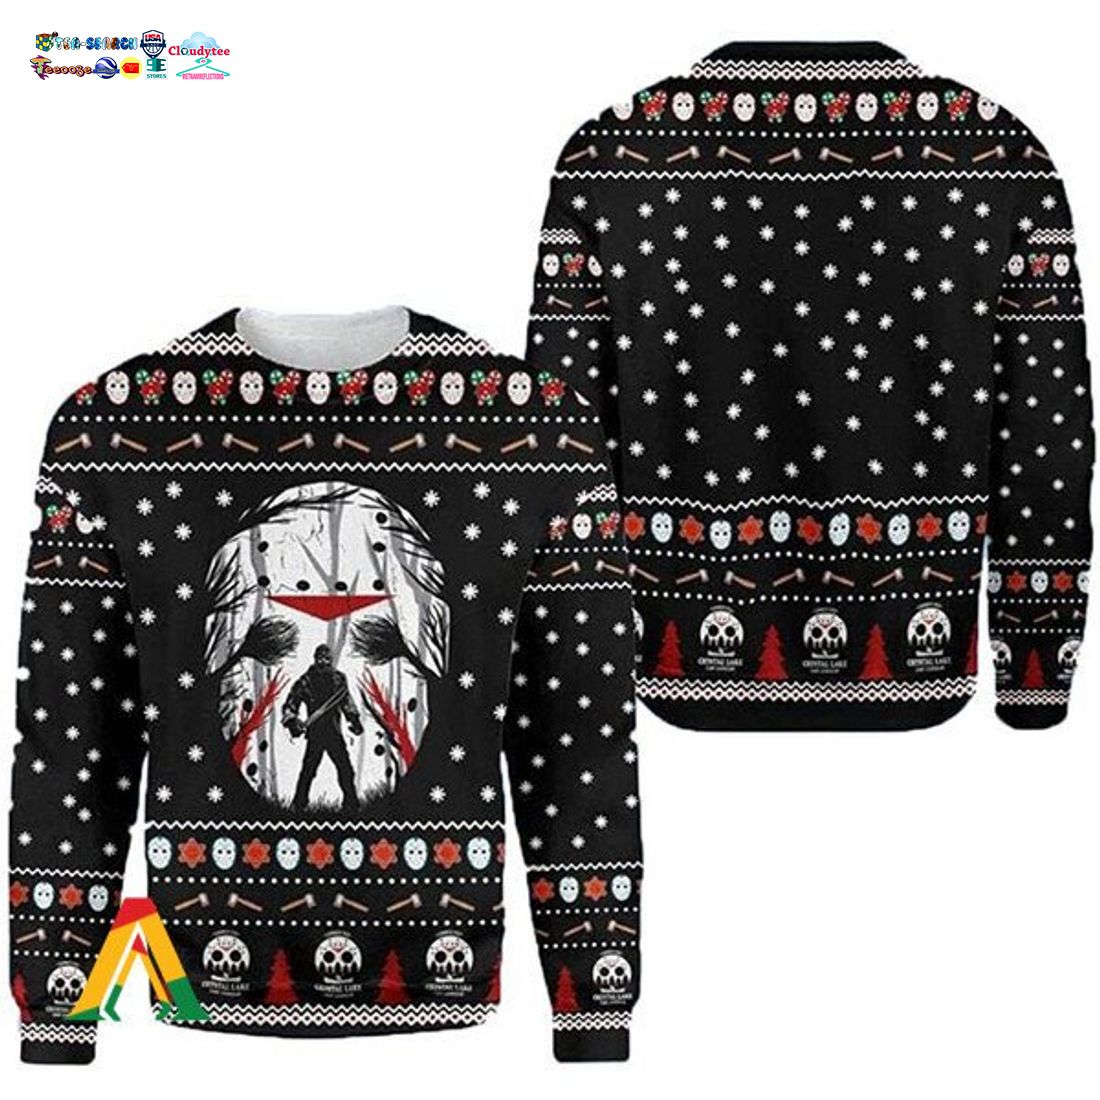 Jason Voorhees Friday The 13th Ugly Christmas Sweater